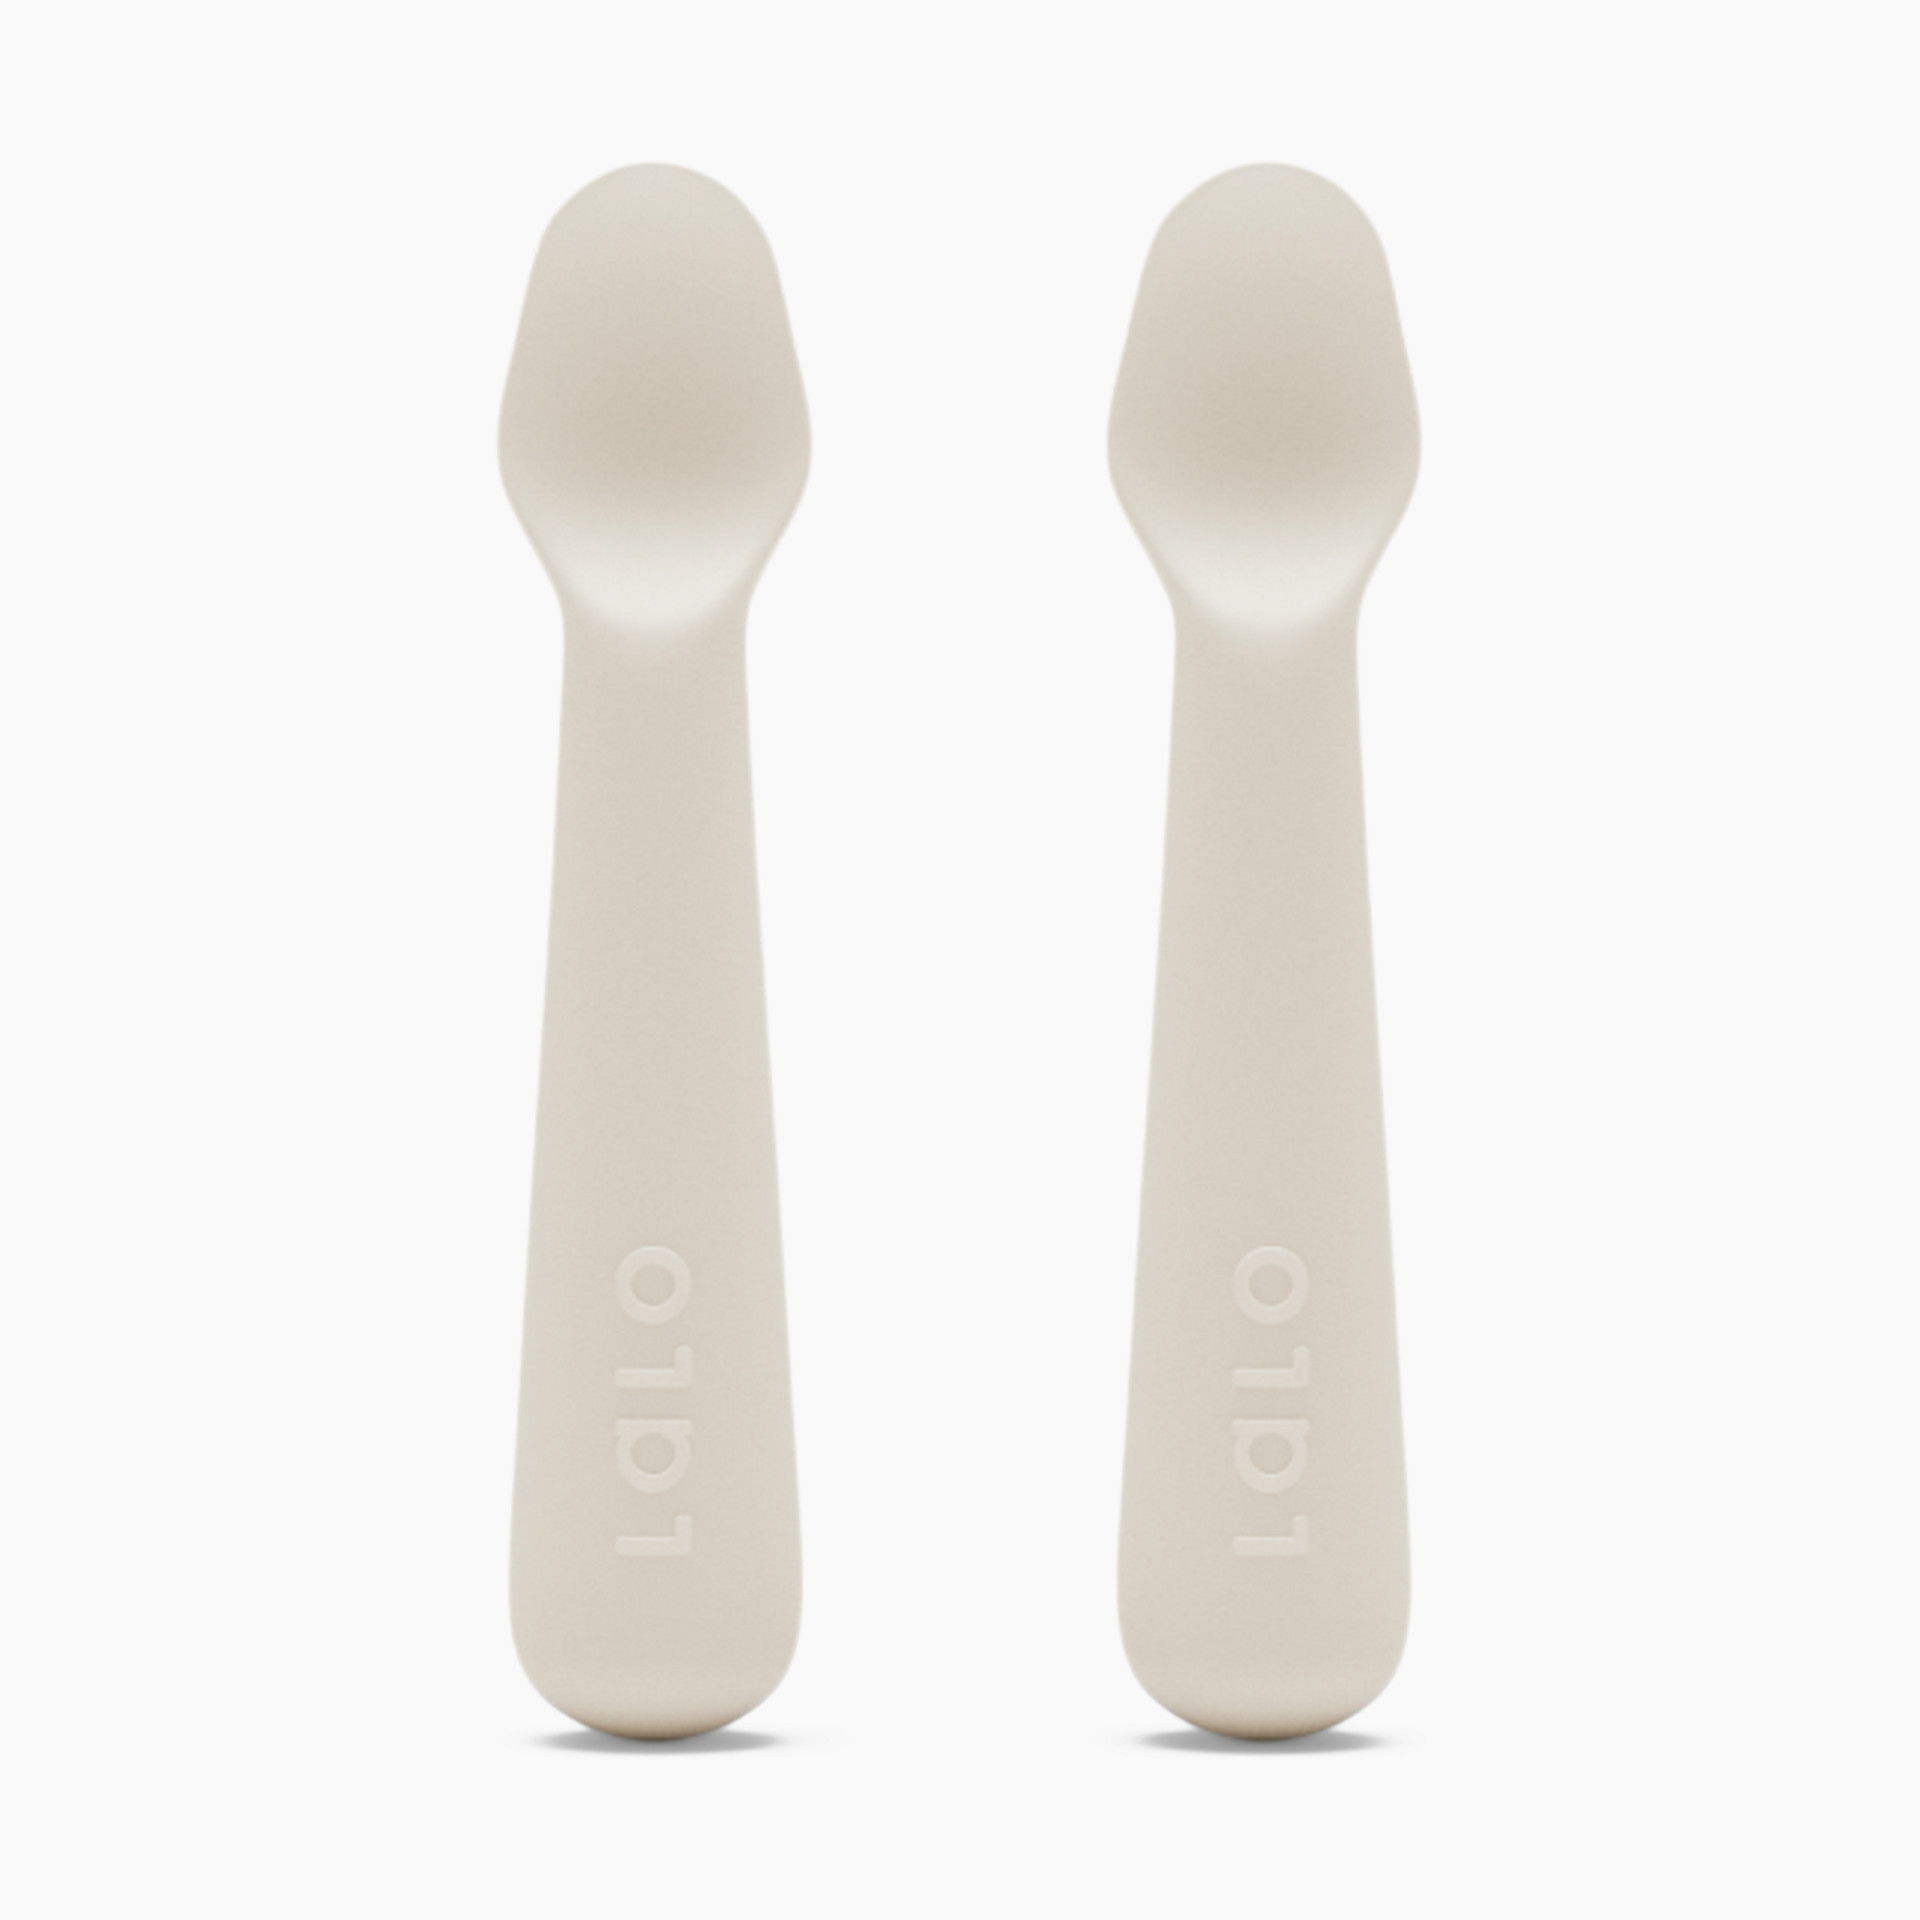 Silicone Dipping Spoons 3 Pack: Lollipop